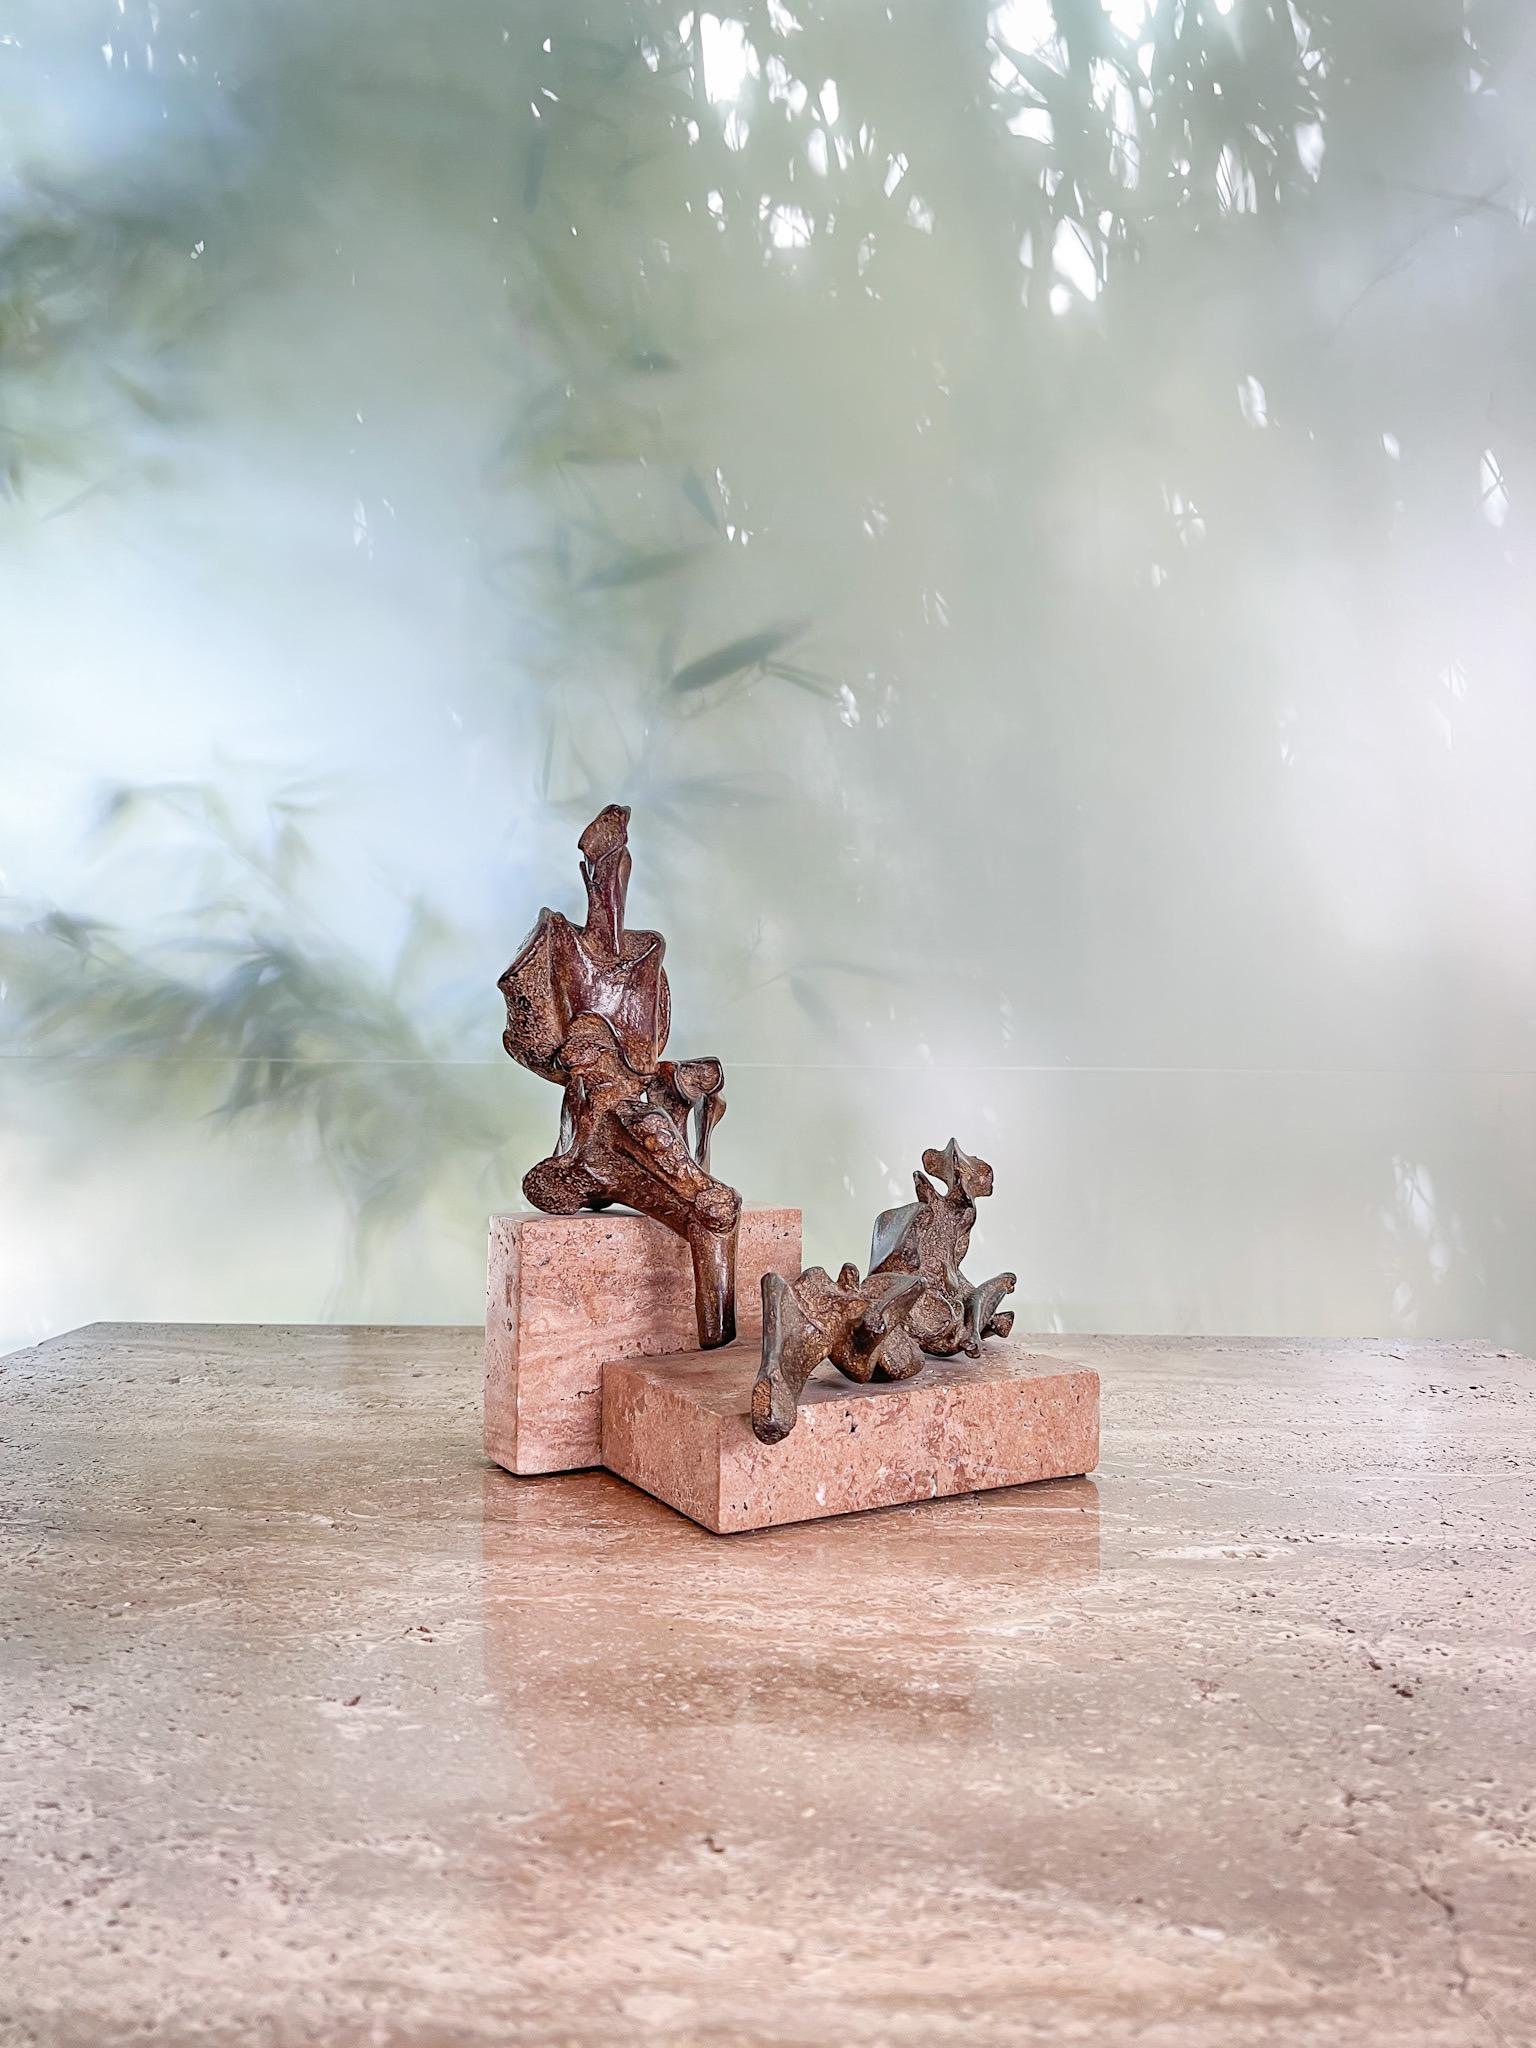 A wonderful pair of figurative abstract bronze sculptures on travertine bases by James Edward Ritchie, 1987. The sculptures are affixed to the base as one unit. Beautiful patina.